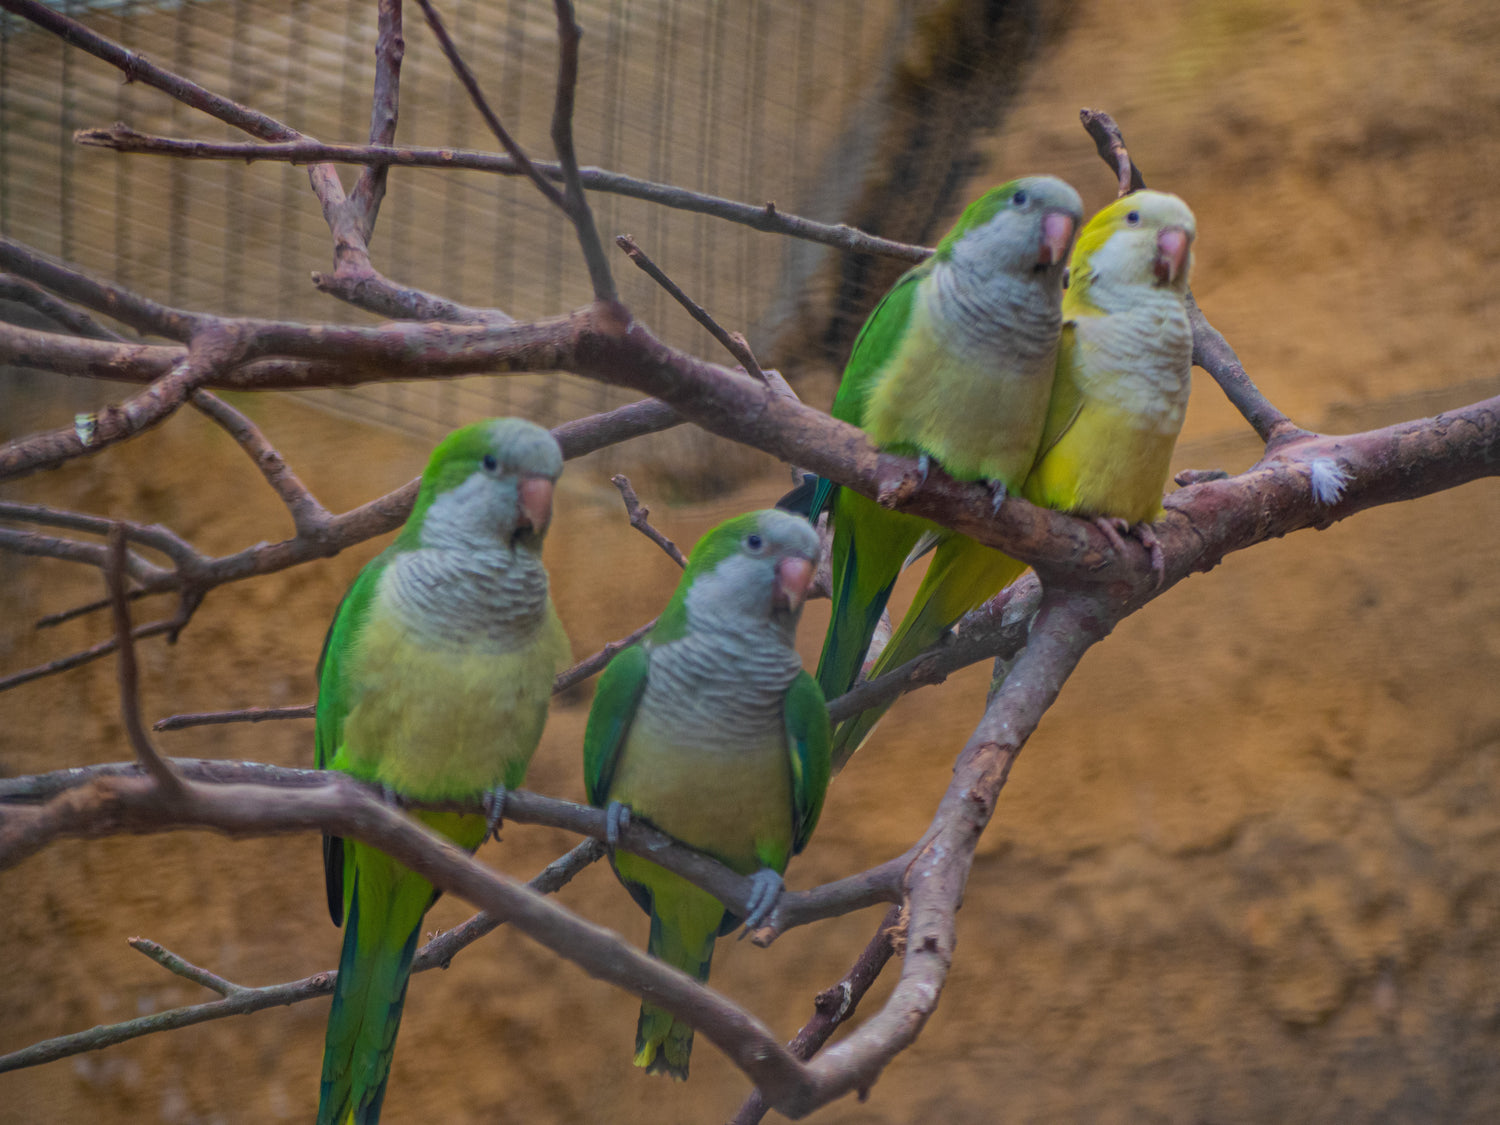 A flock of quaker parrots sitting in a tree.